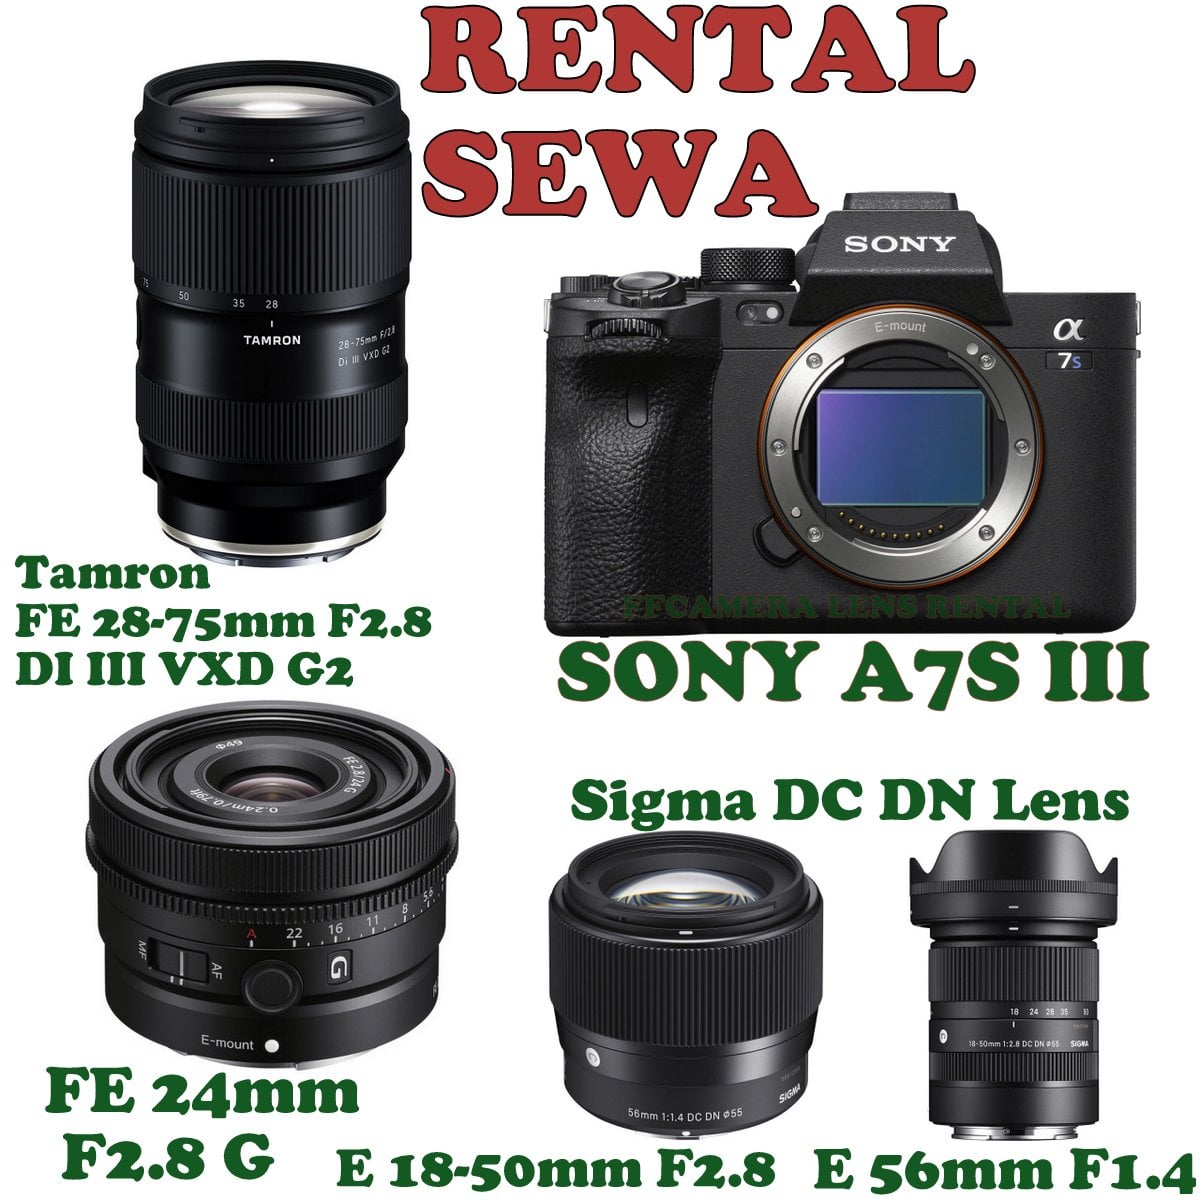 AVAILABLE AT FFCAMERA LENS RENTAL - Sony A7S III - Sony FE 24mm F2.8 G - Tamron FE 28-75mm F2.8 DI III VXD G2 - Sigma E 18-50mm F2.8 DC DN - Sigma E 56mm F1.4 DC DN